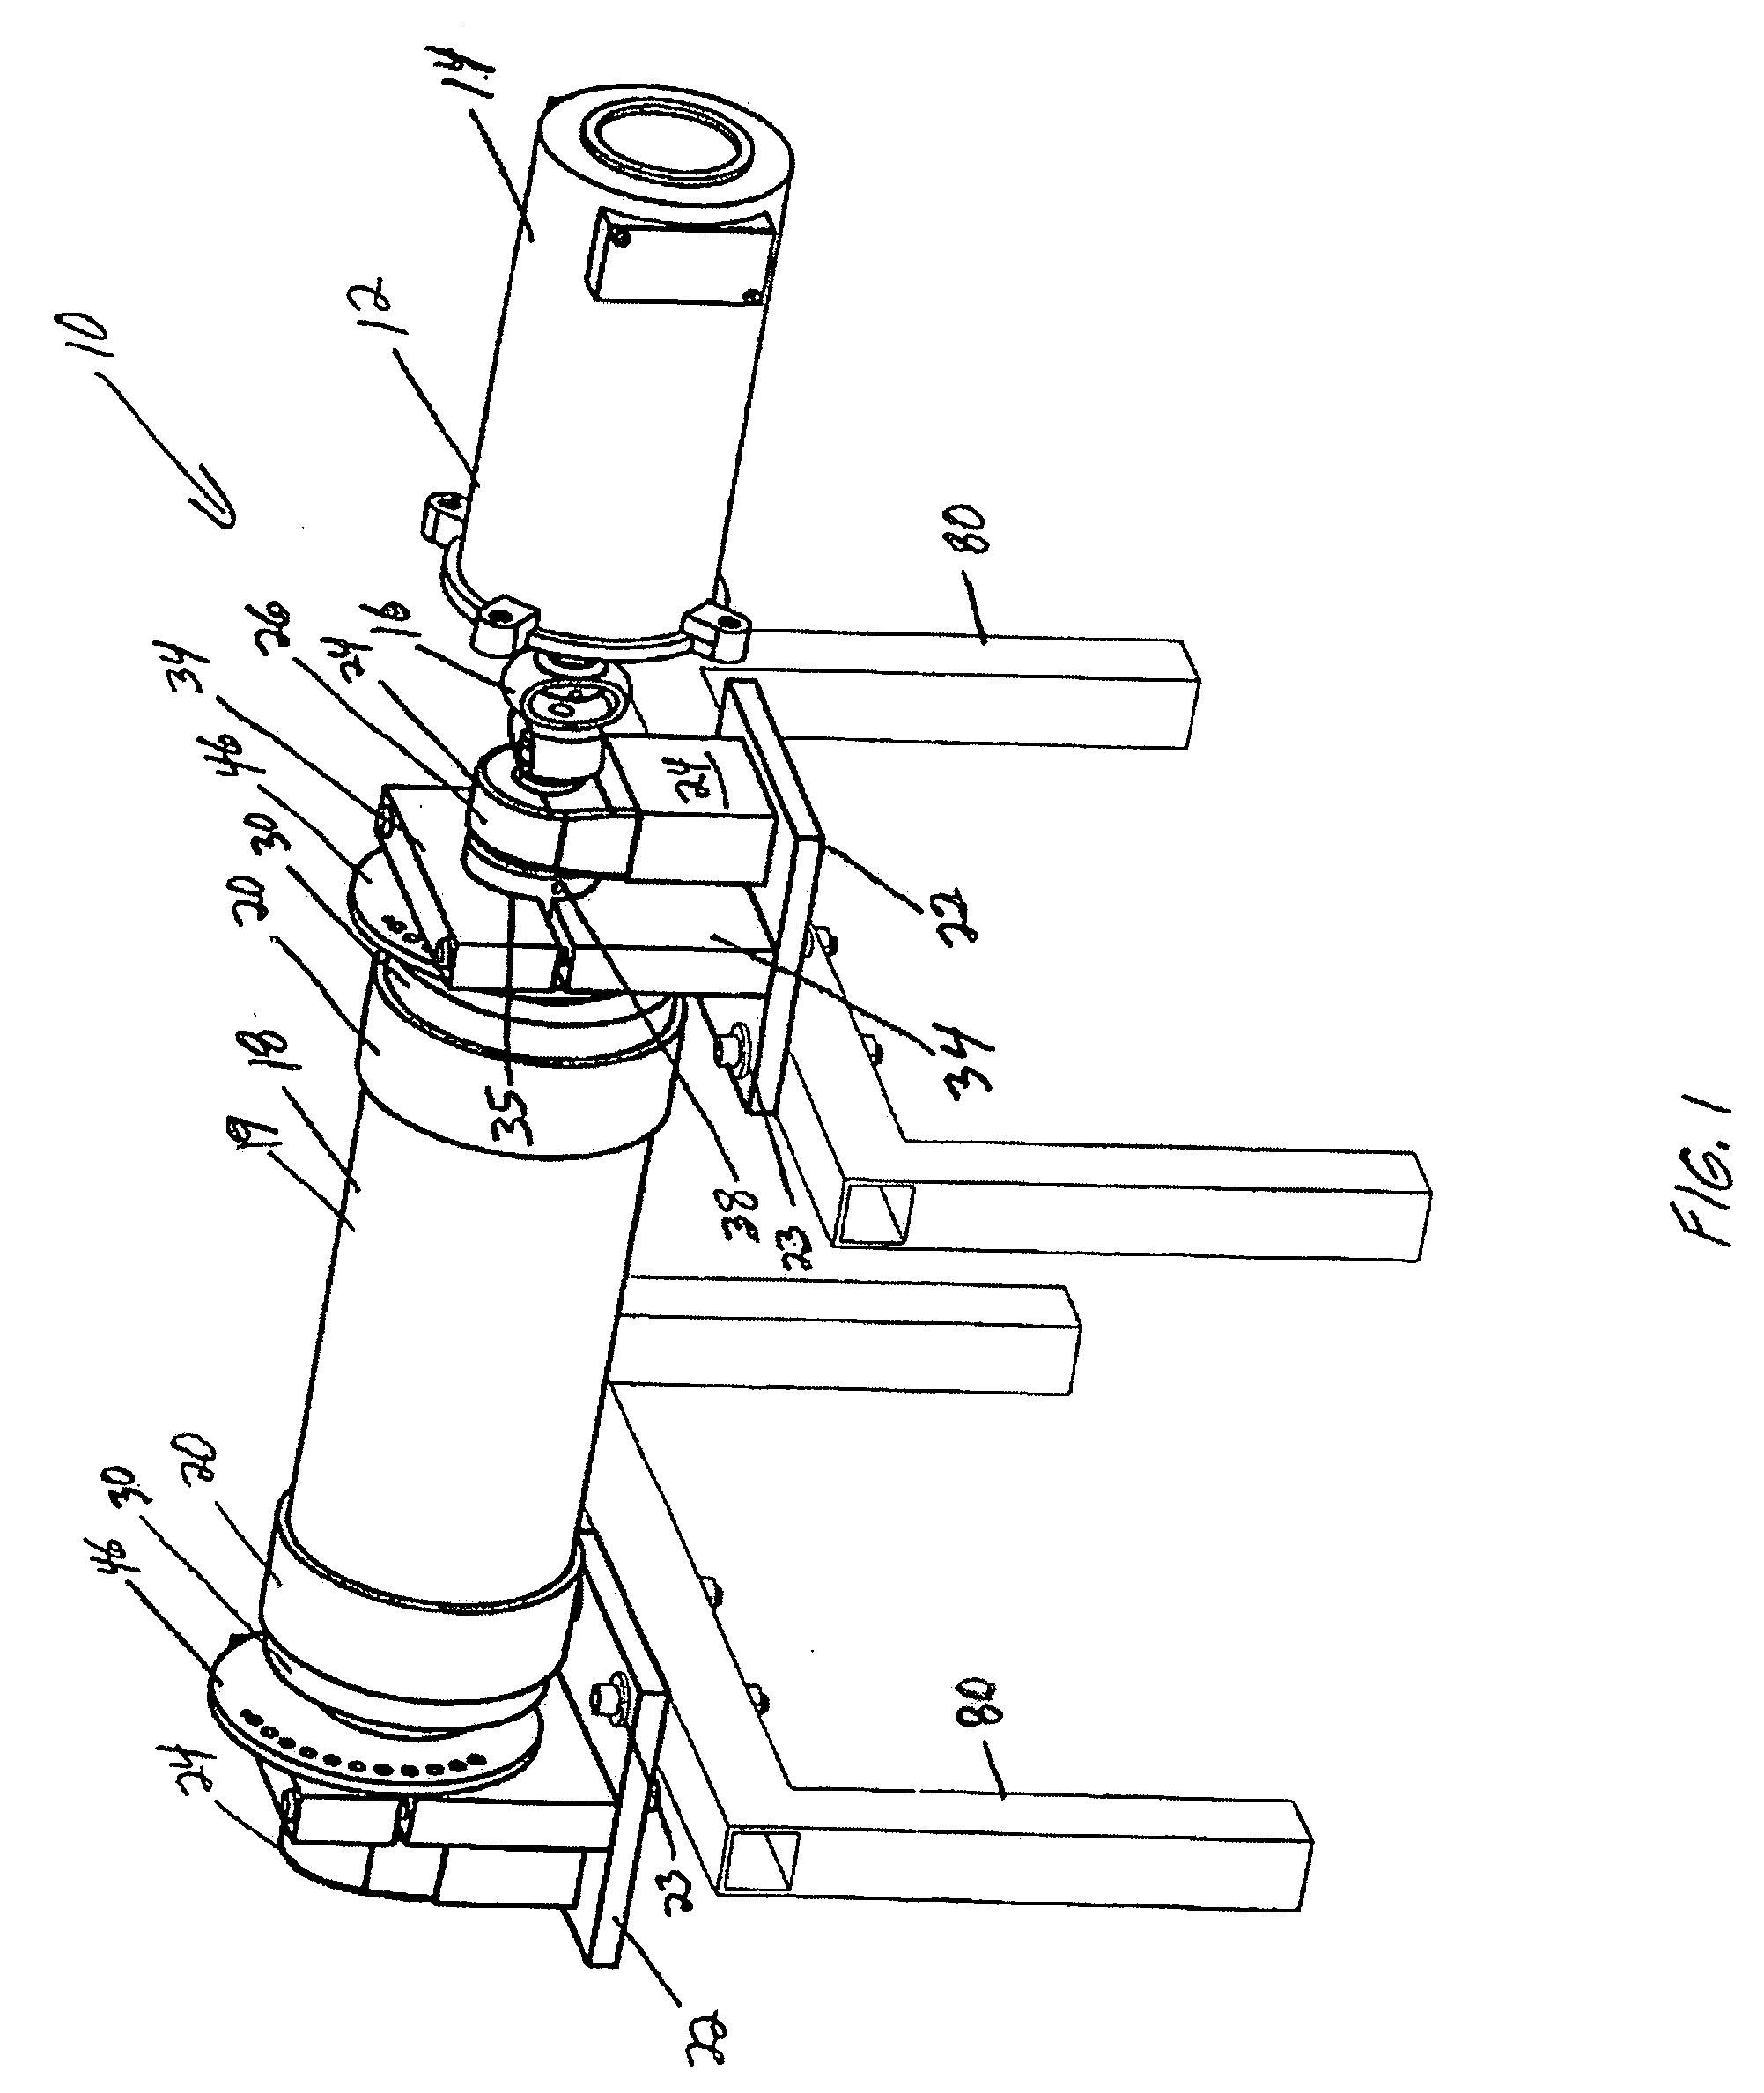 Beltless rare earth roll magnetic separator system and method